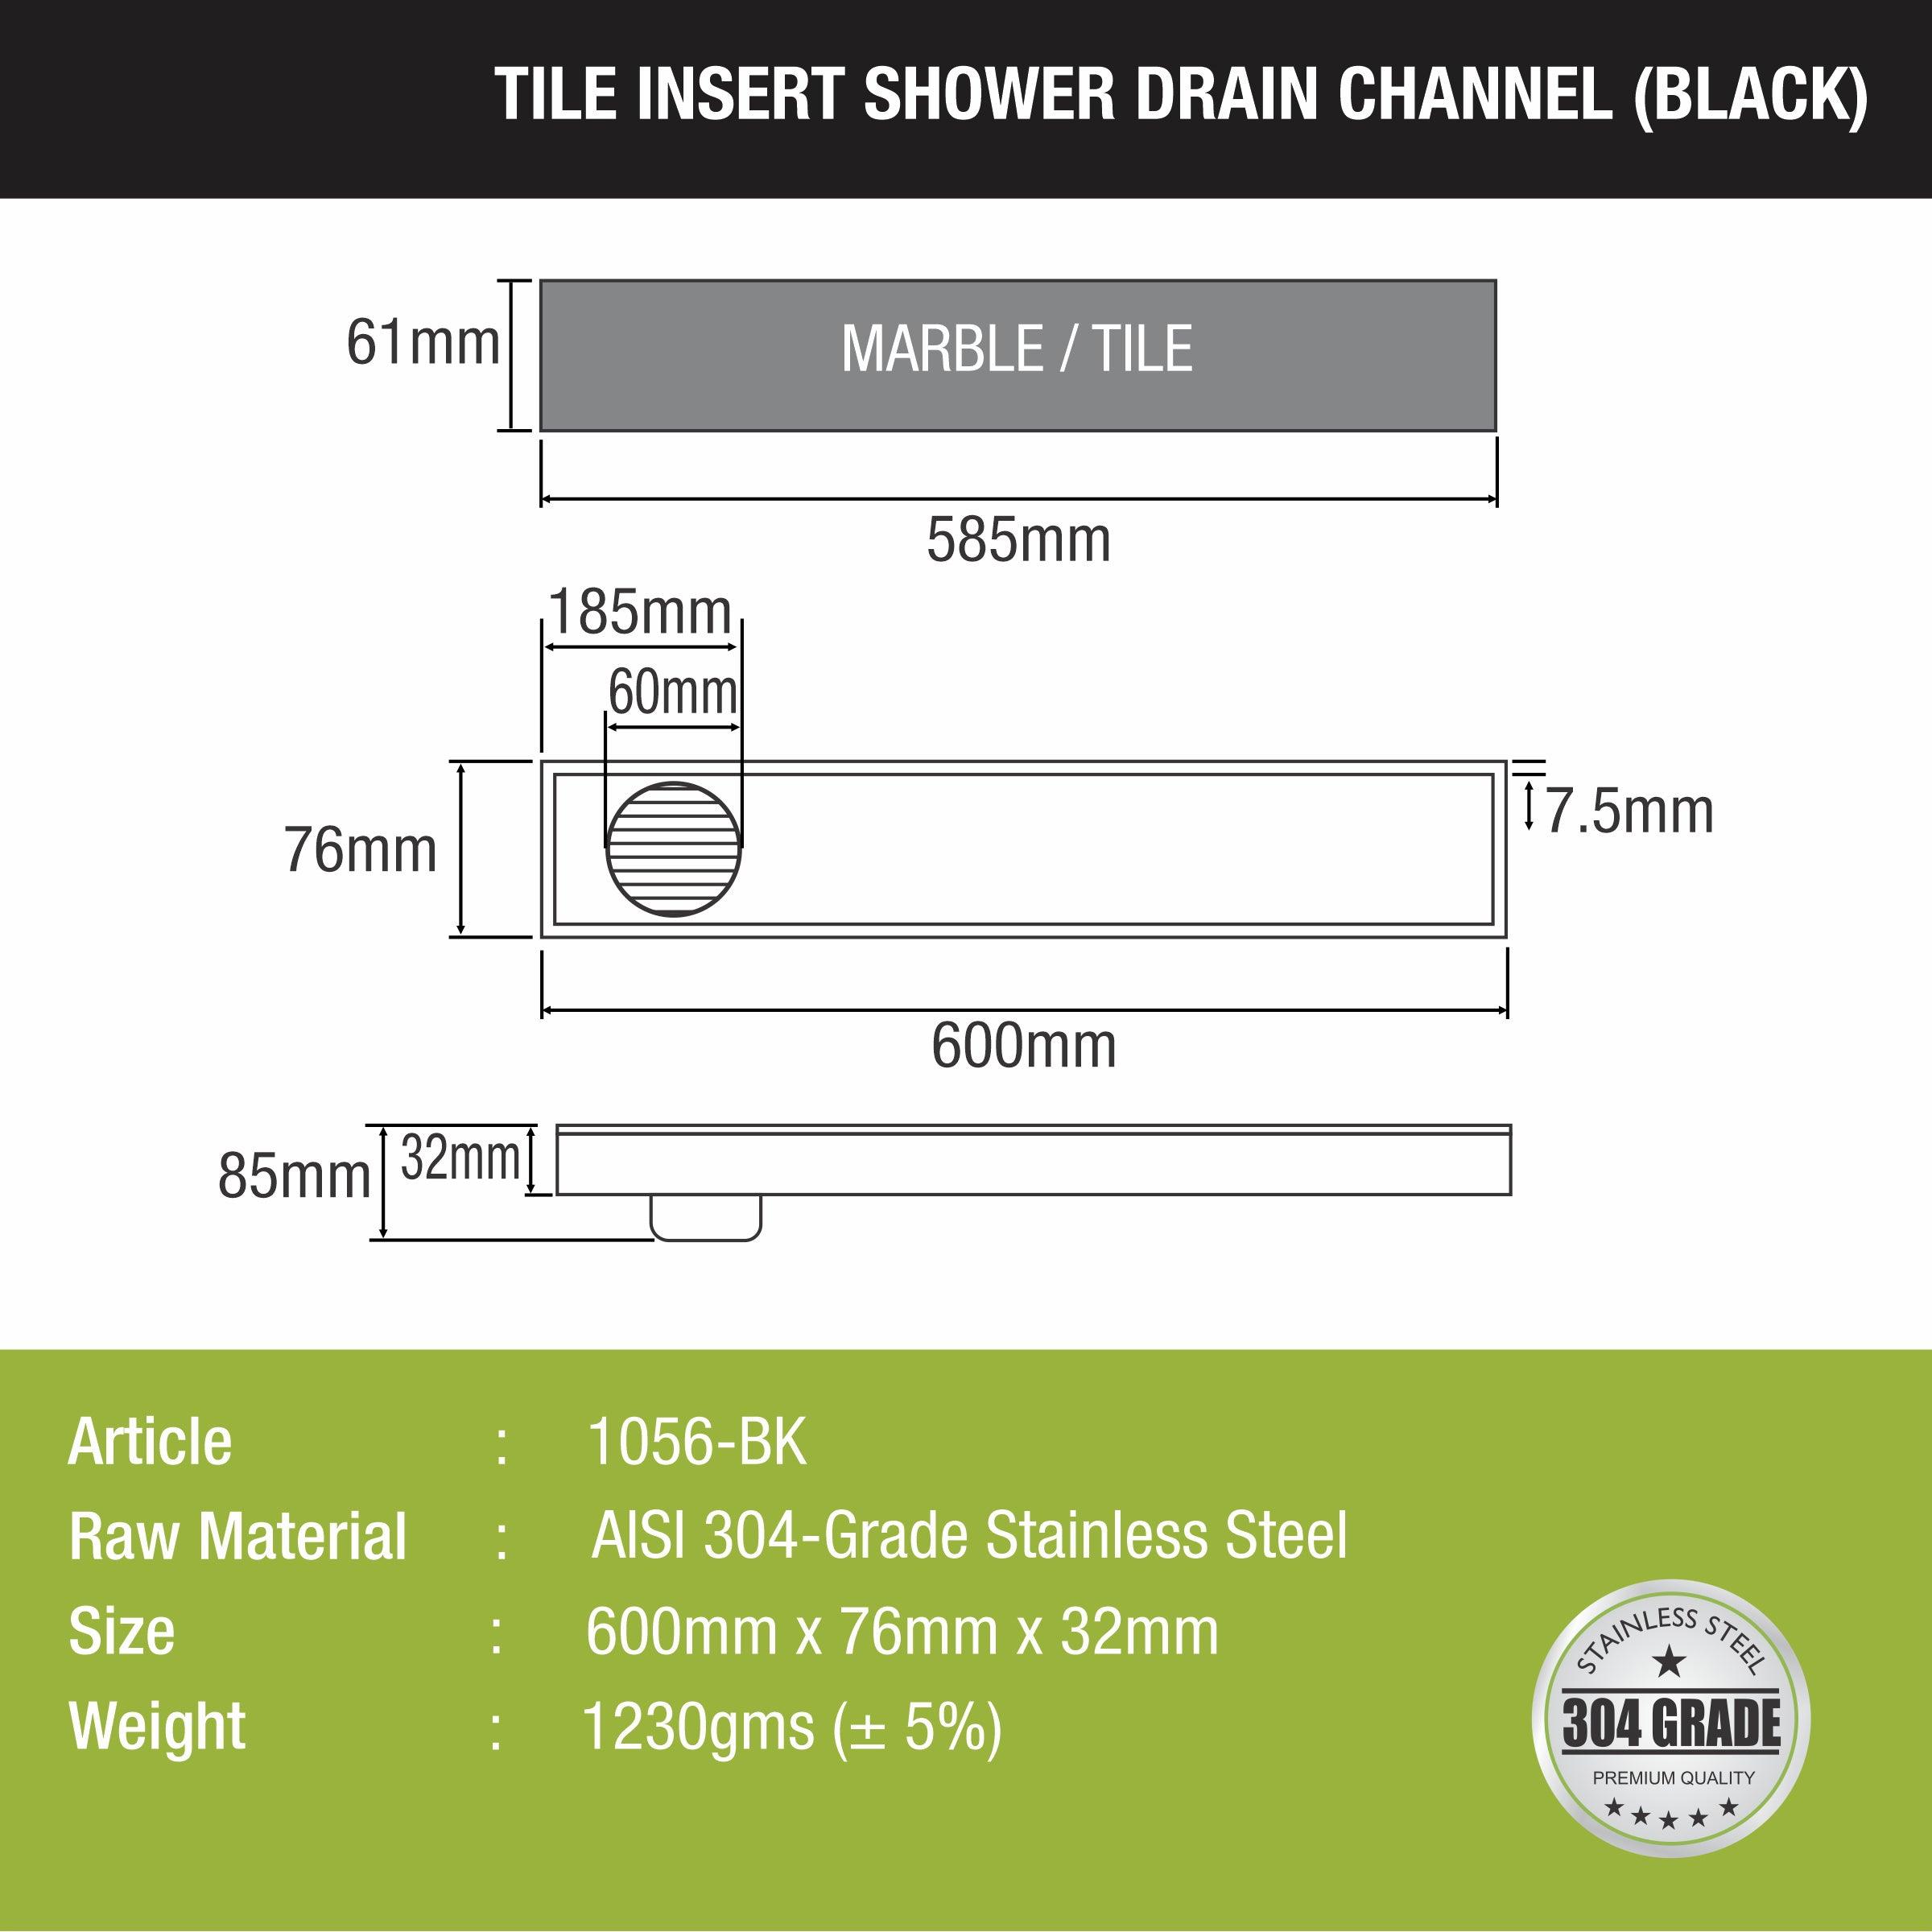 Tile Insert Shower Drain Channel - Black (24 x 3 Inches size and measurement